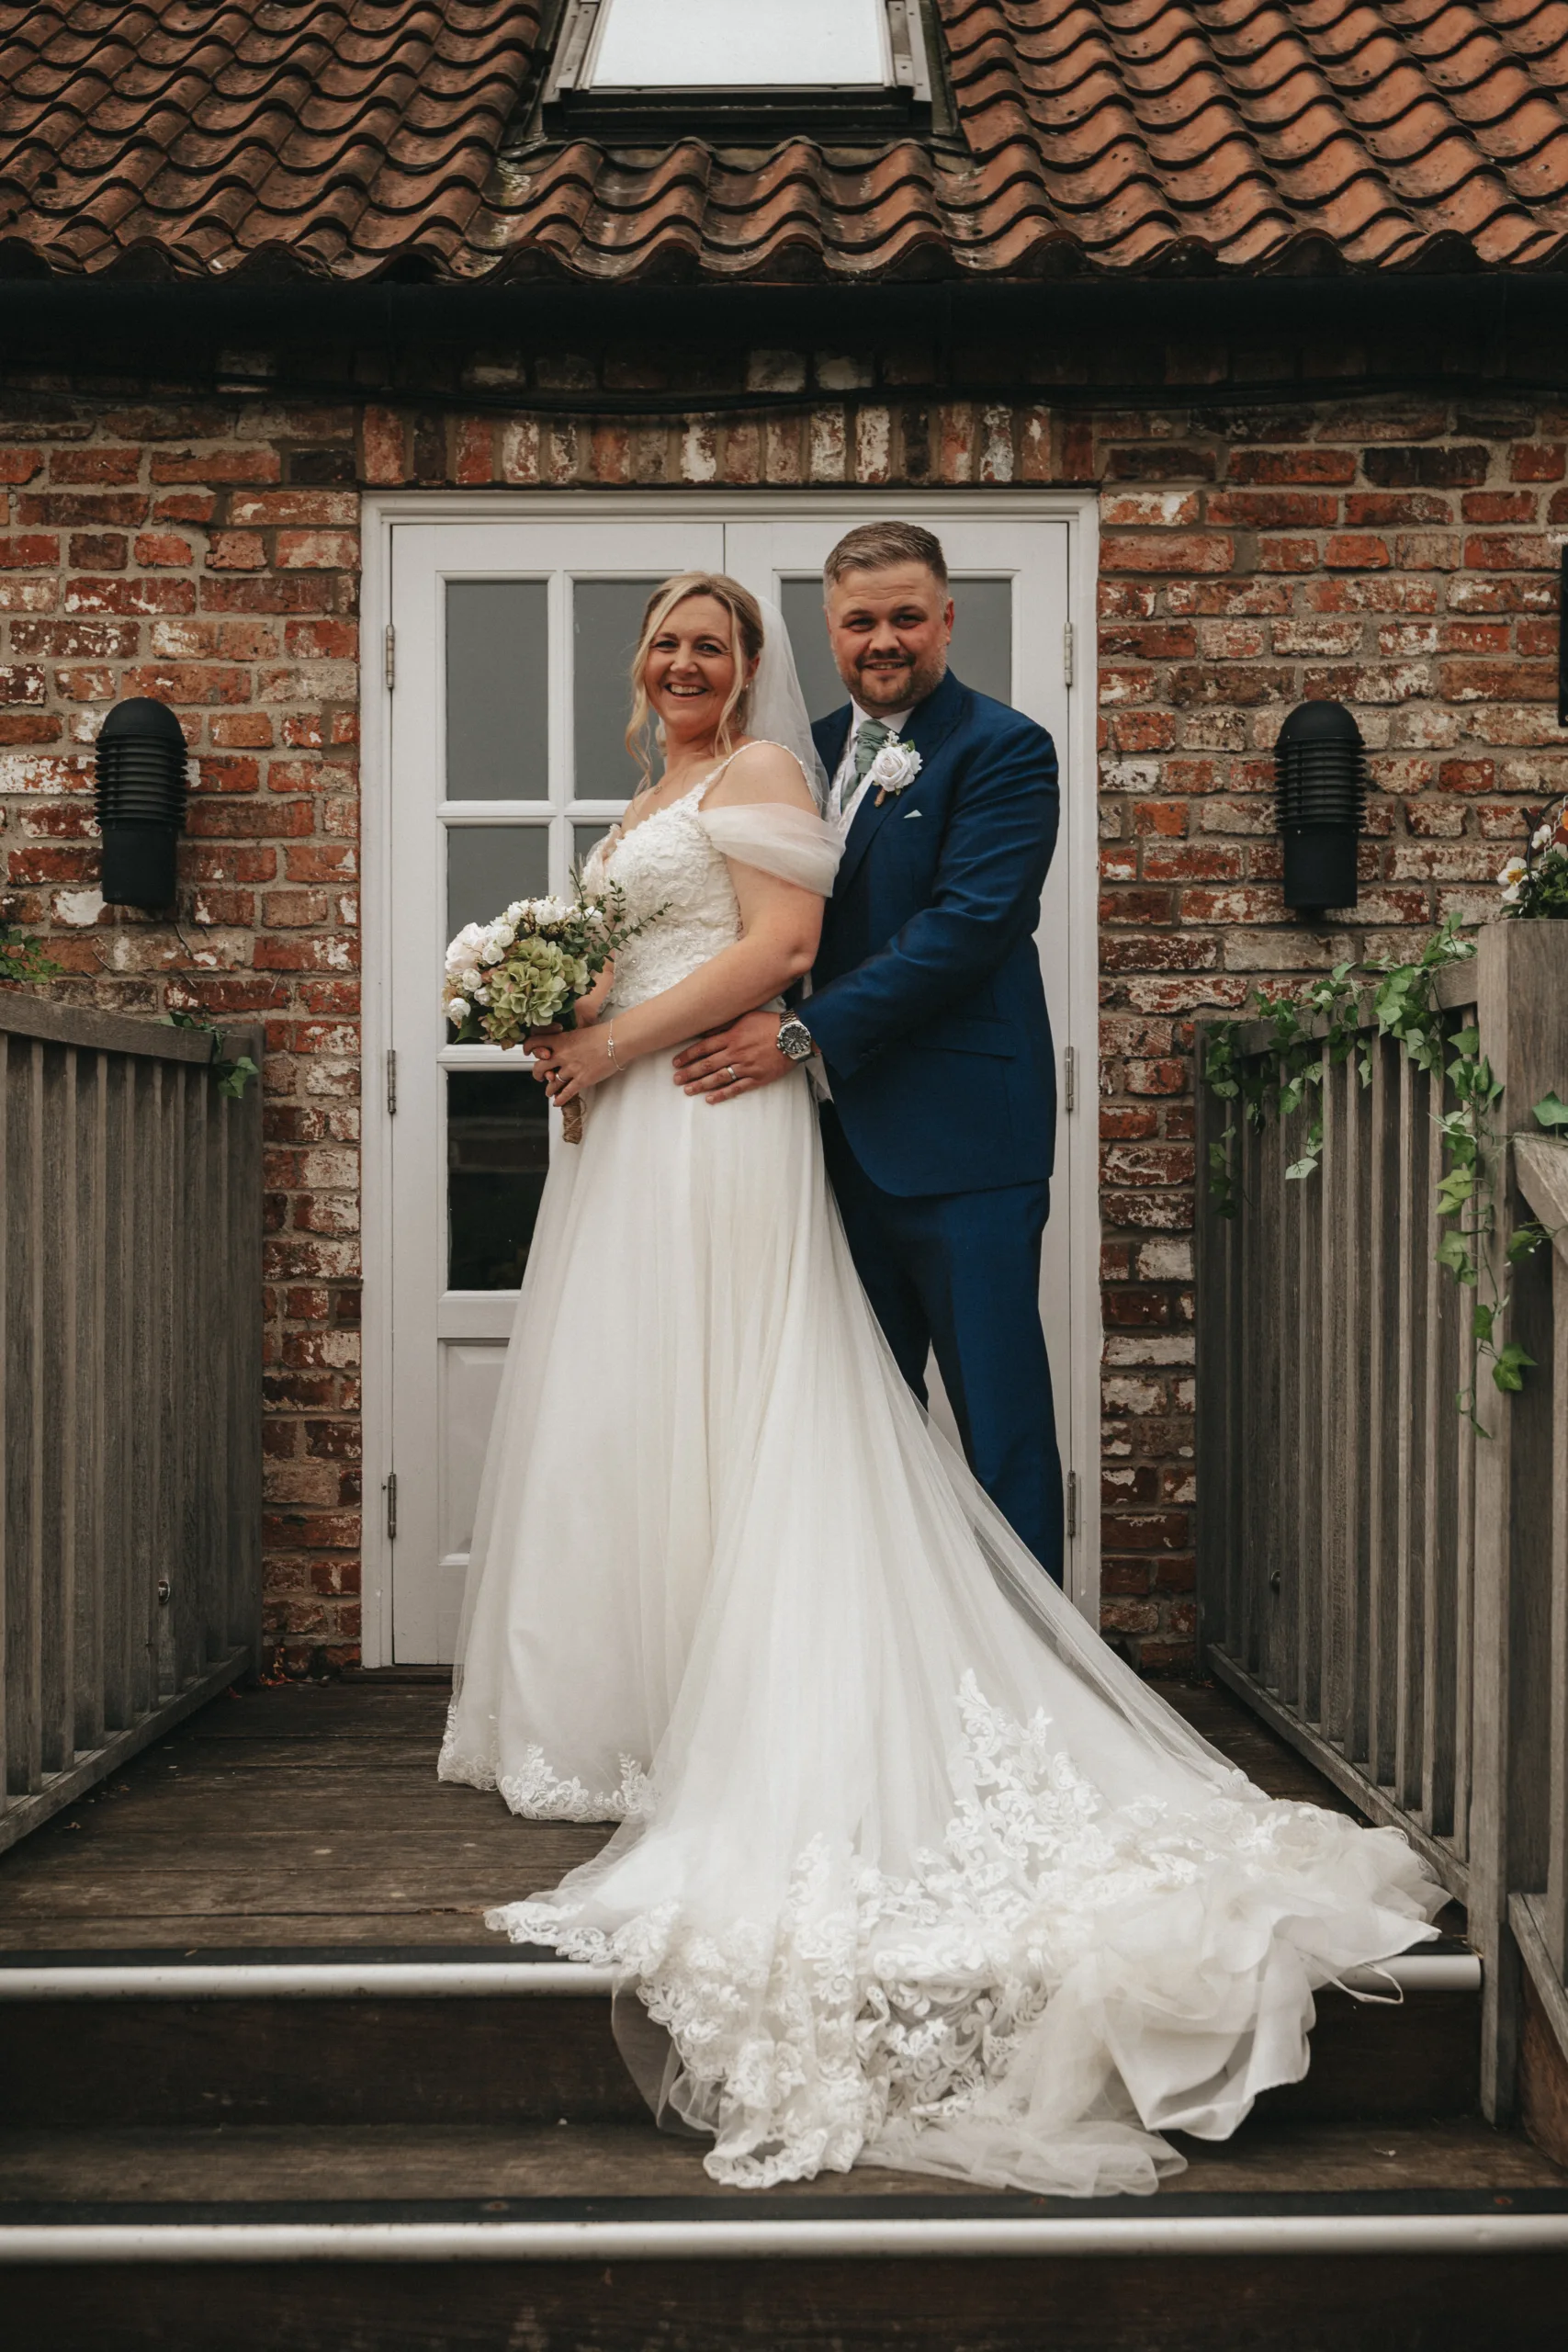 A bride and groom posing in front of a brick house while being photographed by a professional photographer in Lincolnshire.